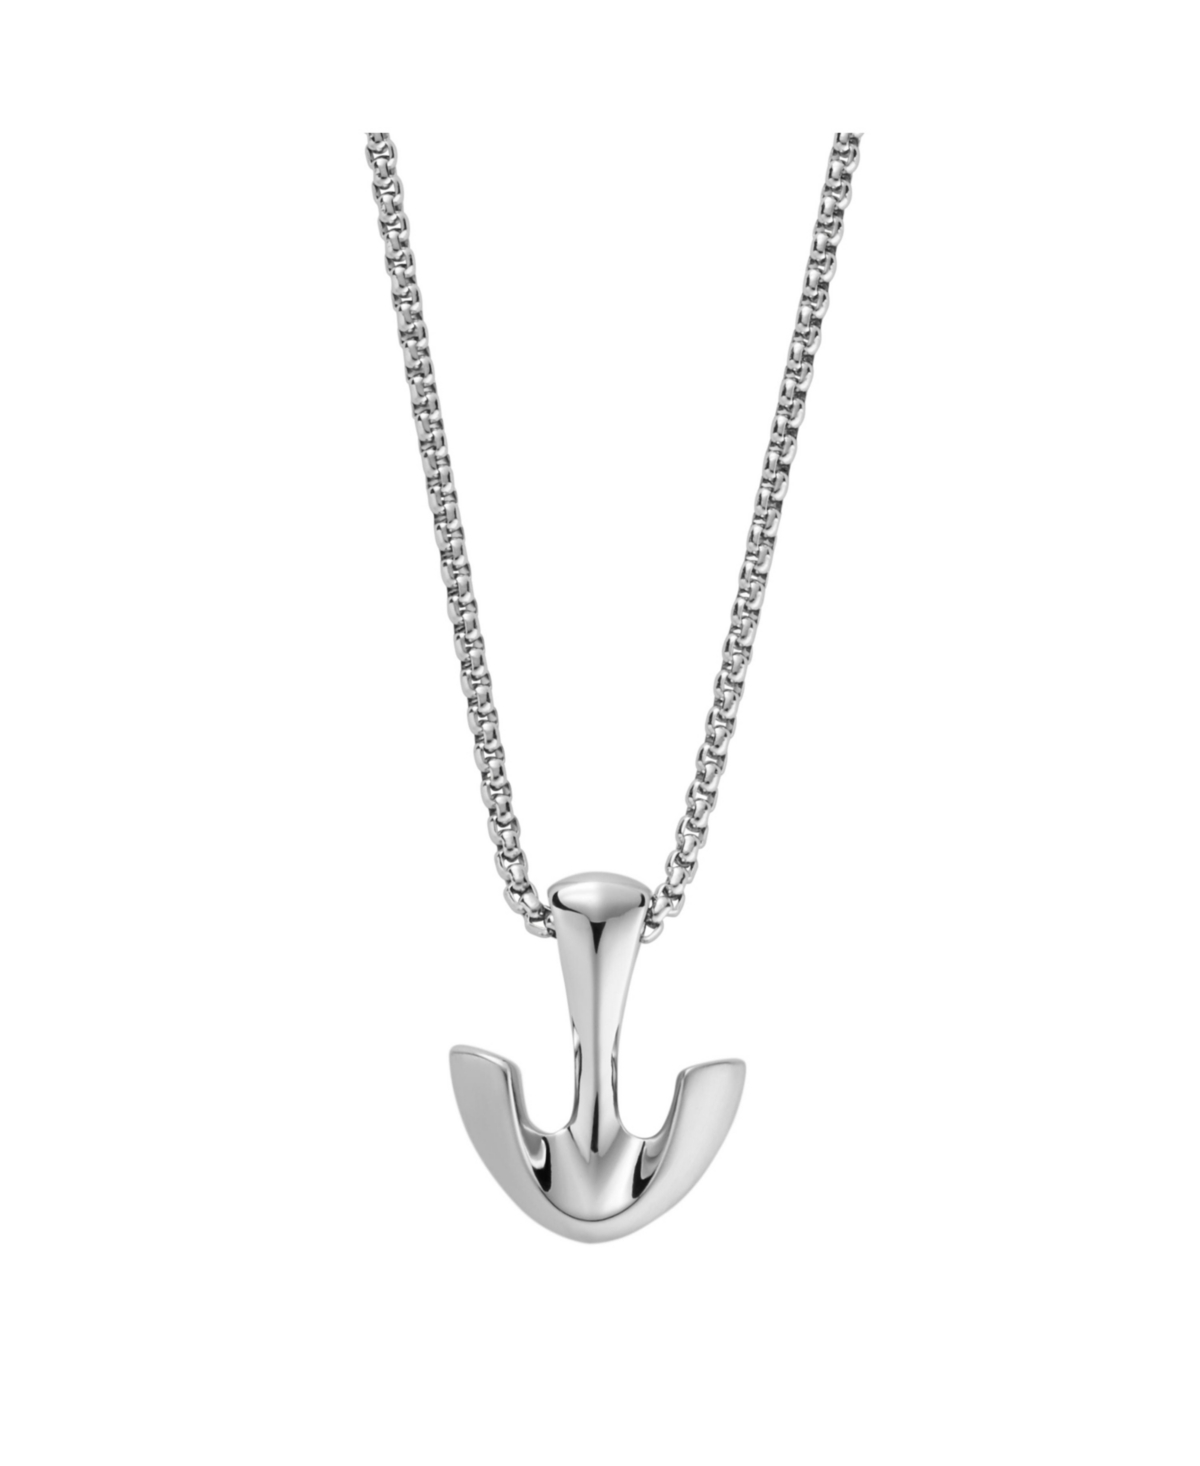 Men's Pendler Silver Stainless Steel Pendant Necklace - Silver